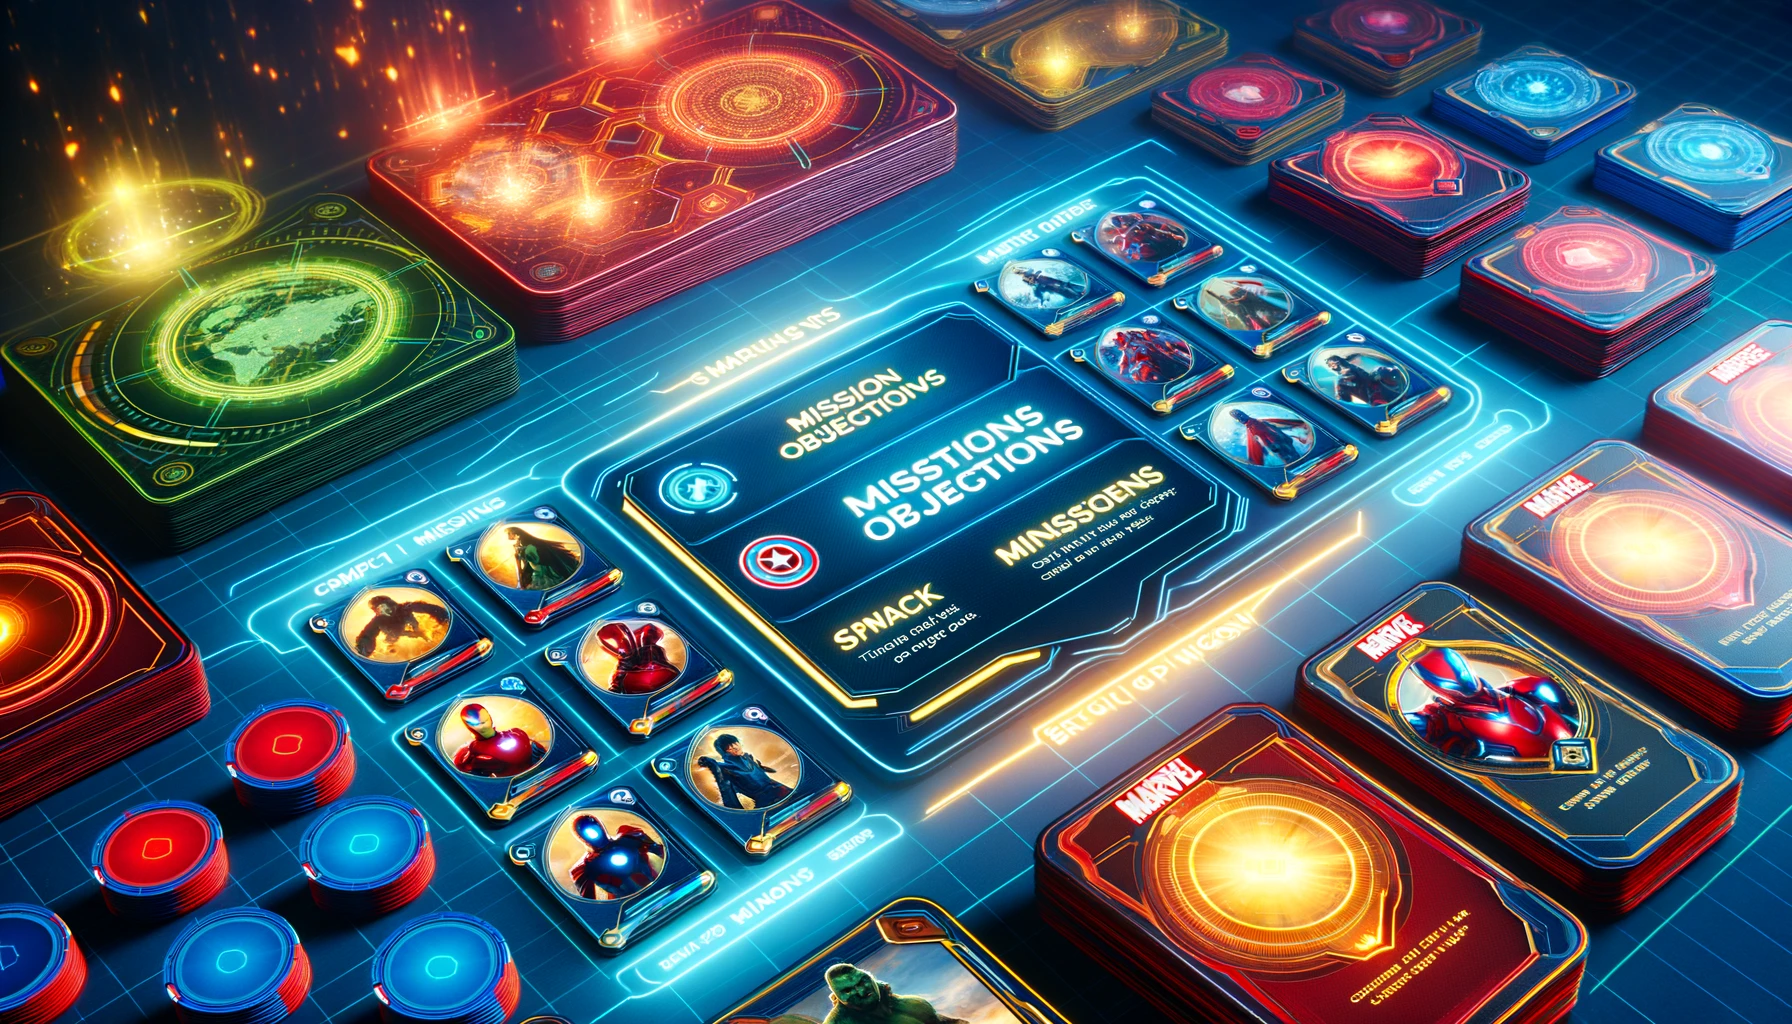 A bright, futuristic display showing Marvel Snap decks and mission objectives, highlighting the synergy between strong deck-building and completing missions.